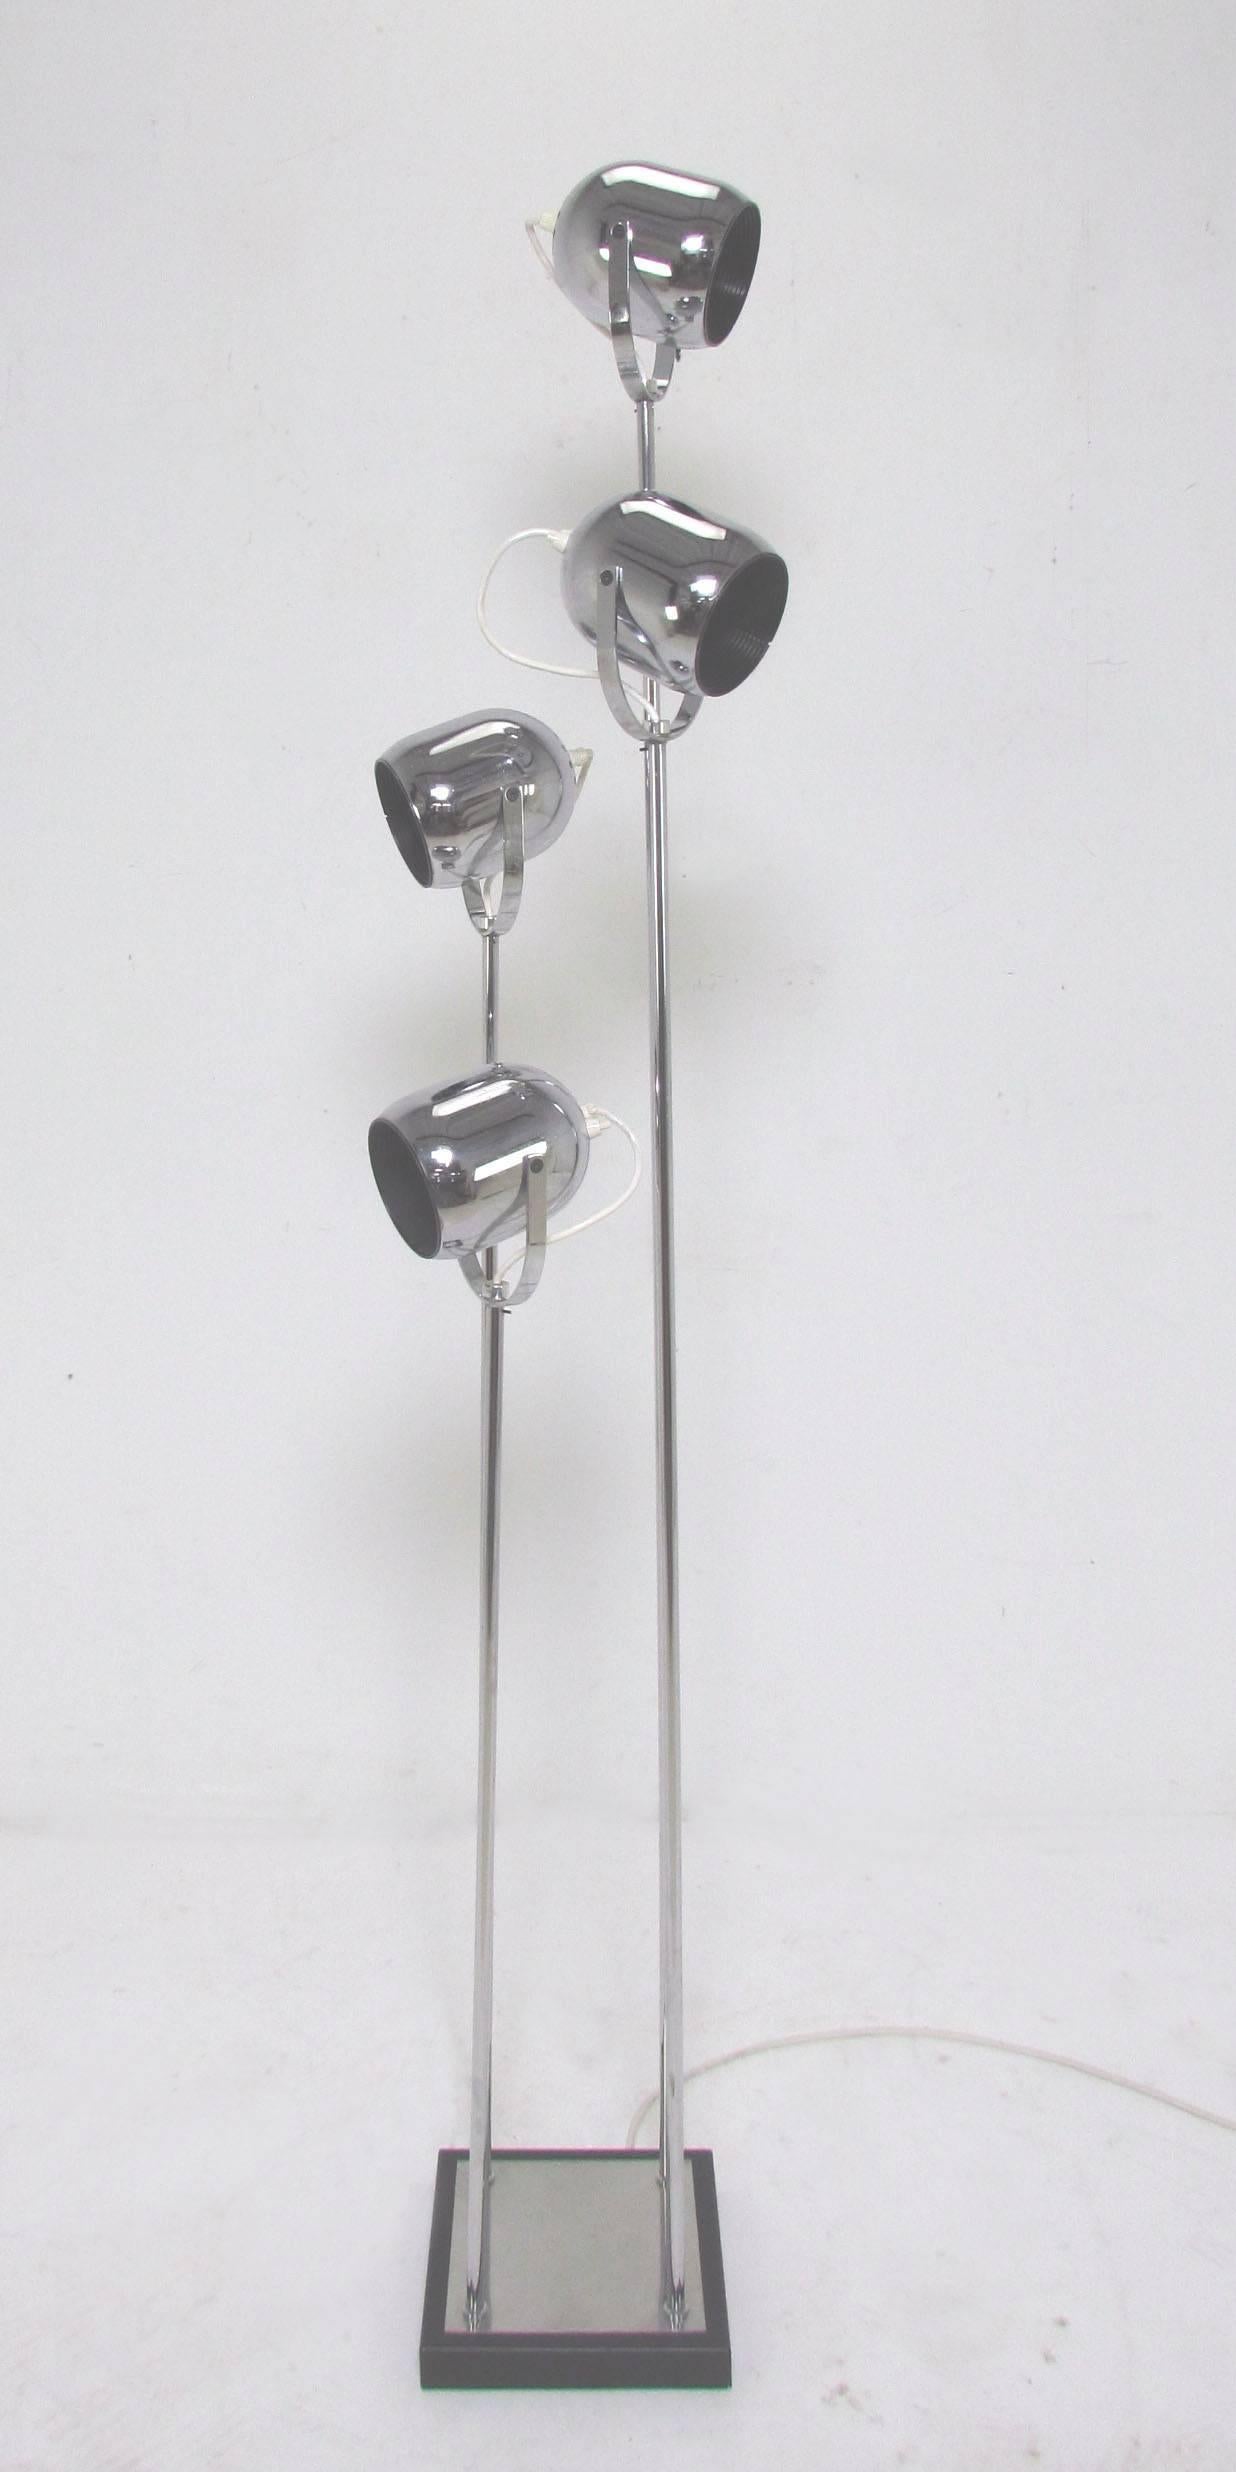 Floor lamp with four adjustable pivoting spot lights in chromed steel, signed Reggiani, Italy, circa 1970s.

Approximately 65